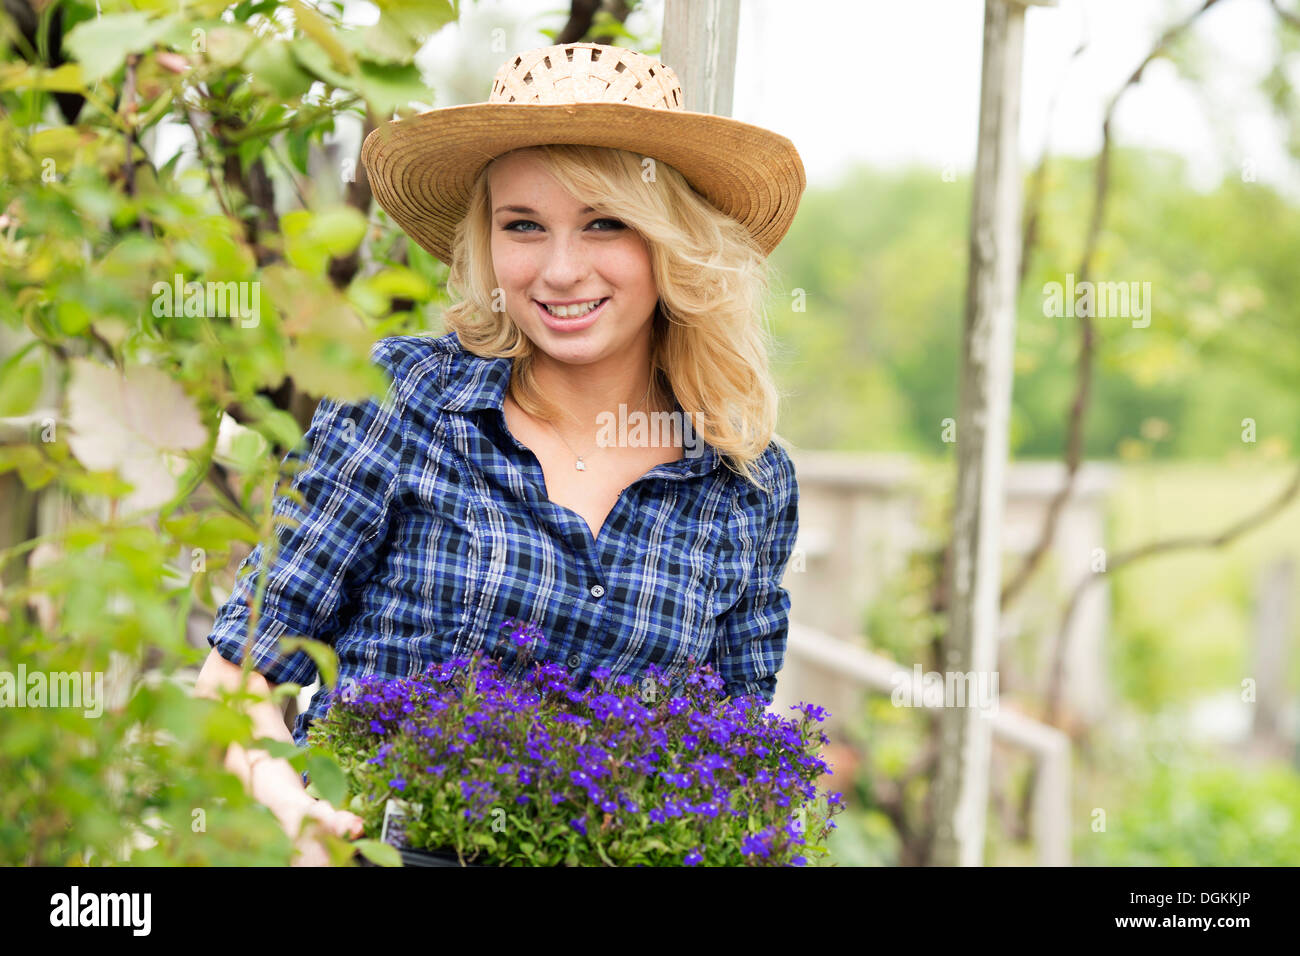 USA, New Jersey, Old Wick, Portrait of young woman holding potted flowers Stock Photo